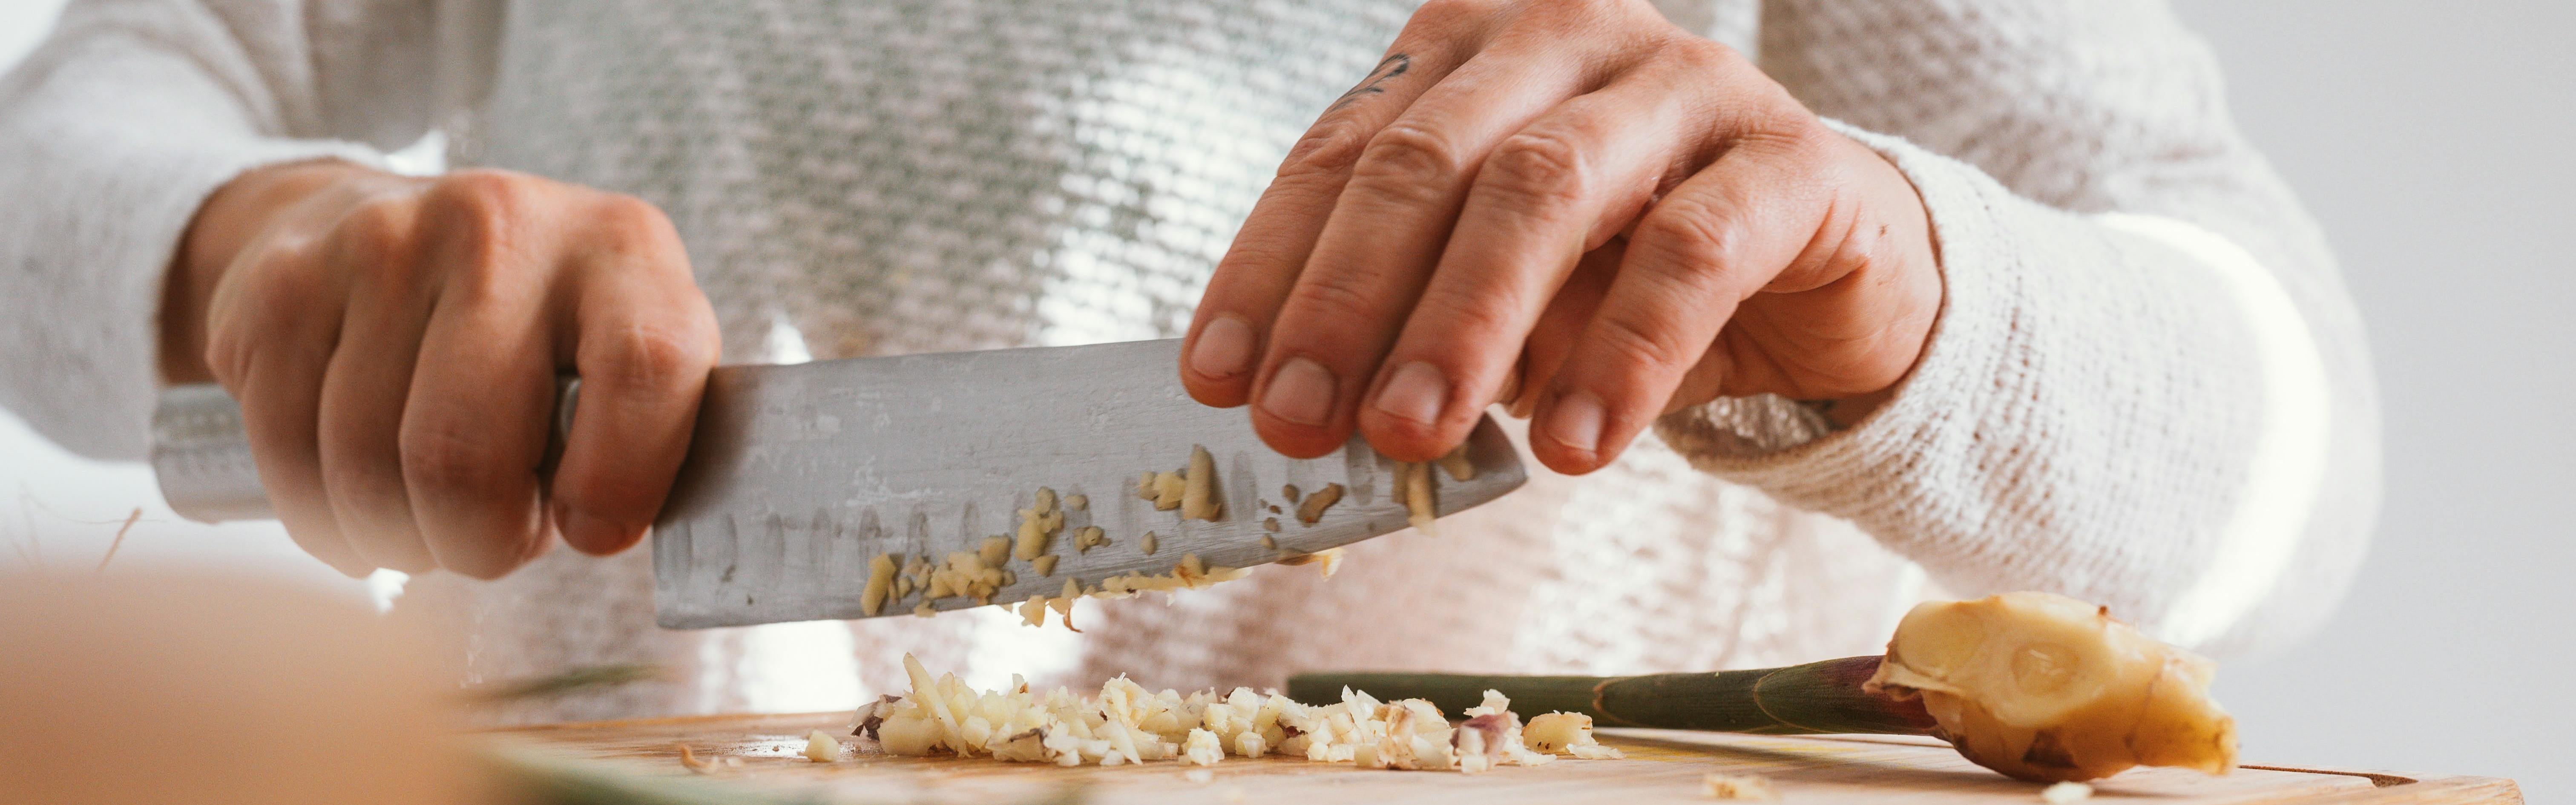 A chef using a knife to chop some garlic.